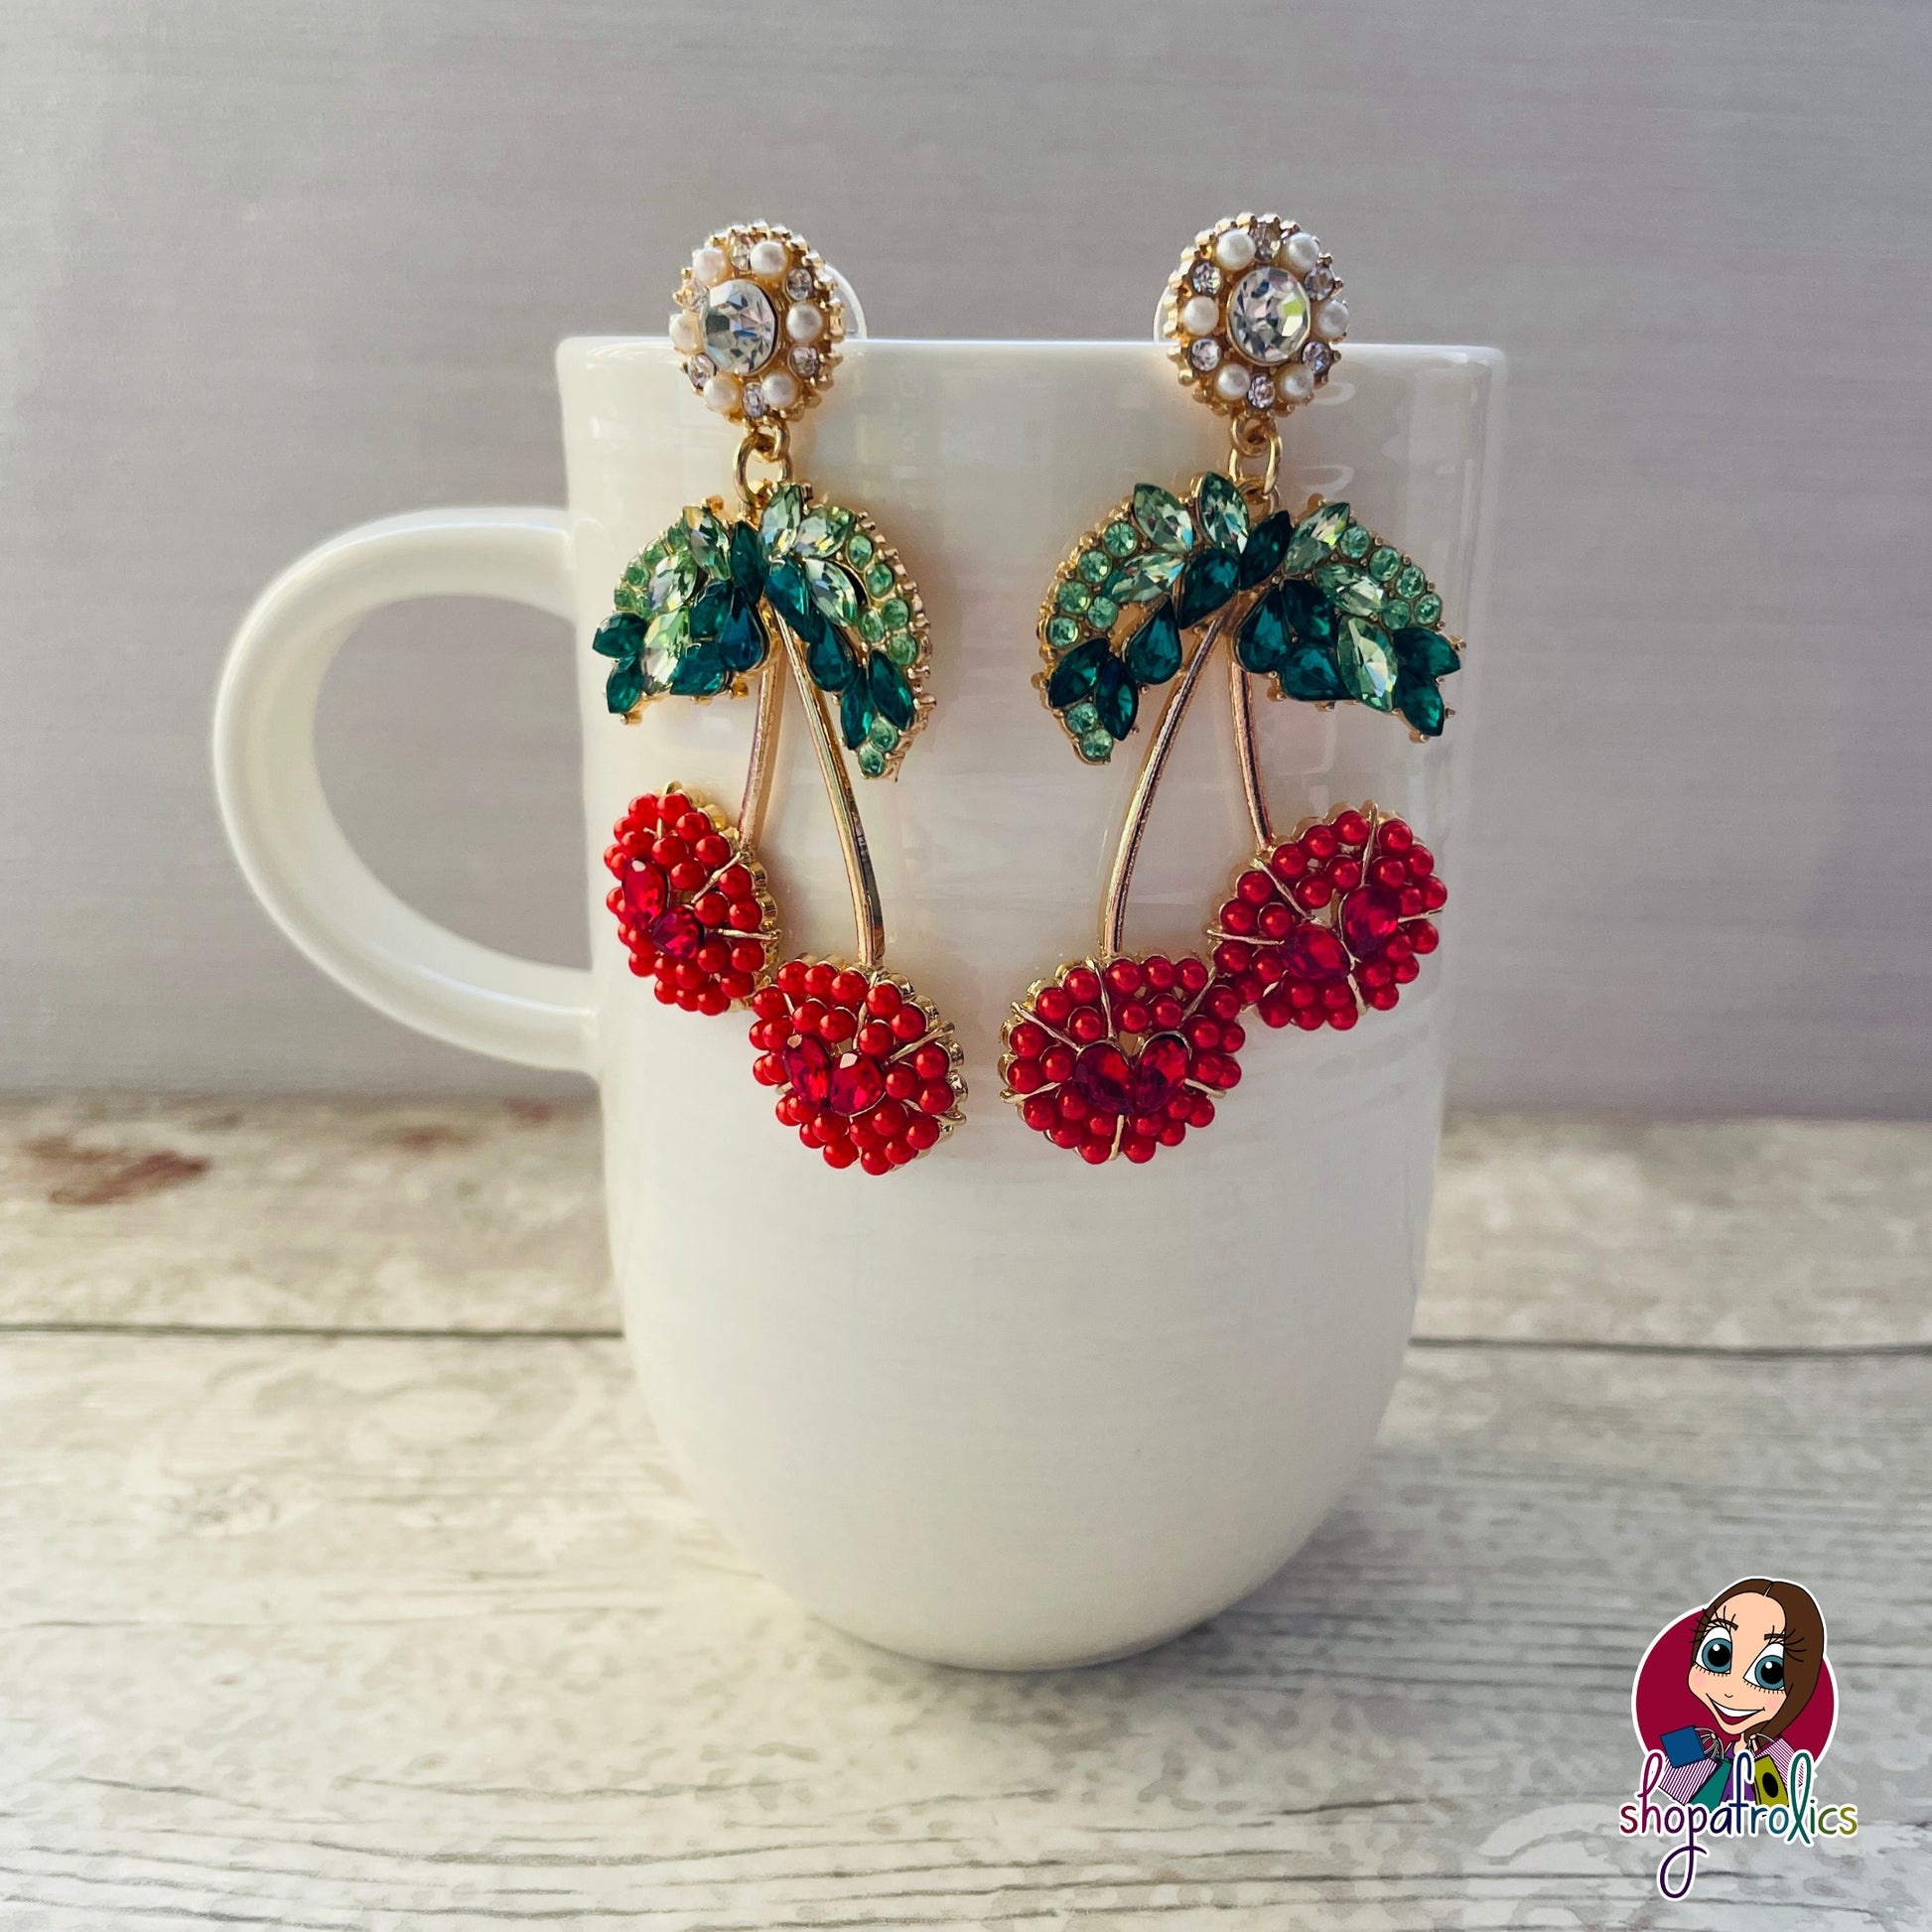 Large cherry crystal earrings with embellishments